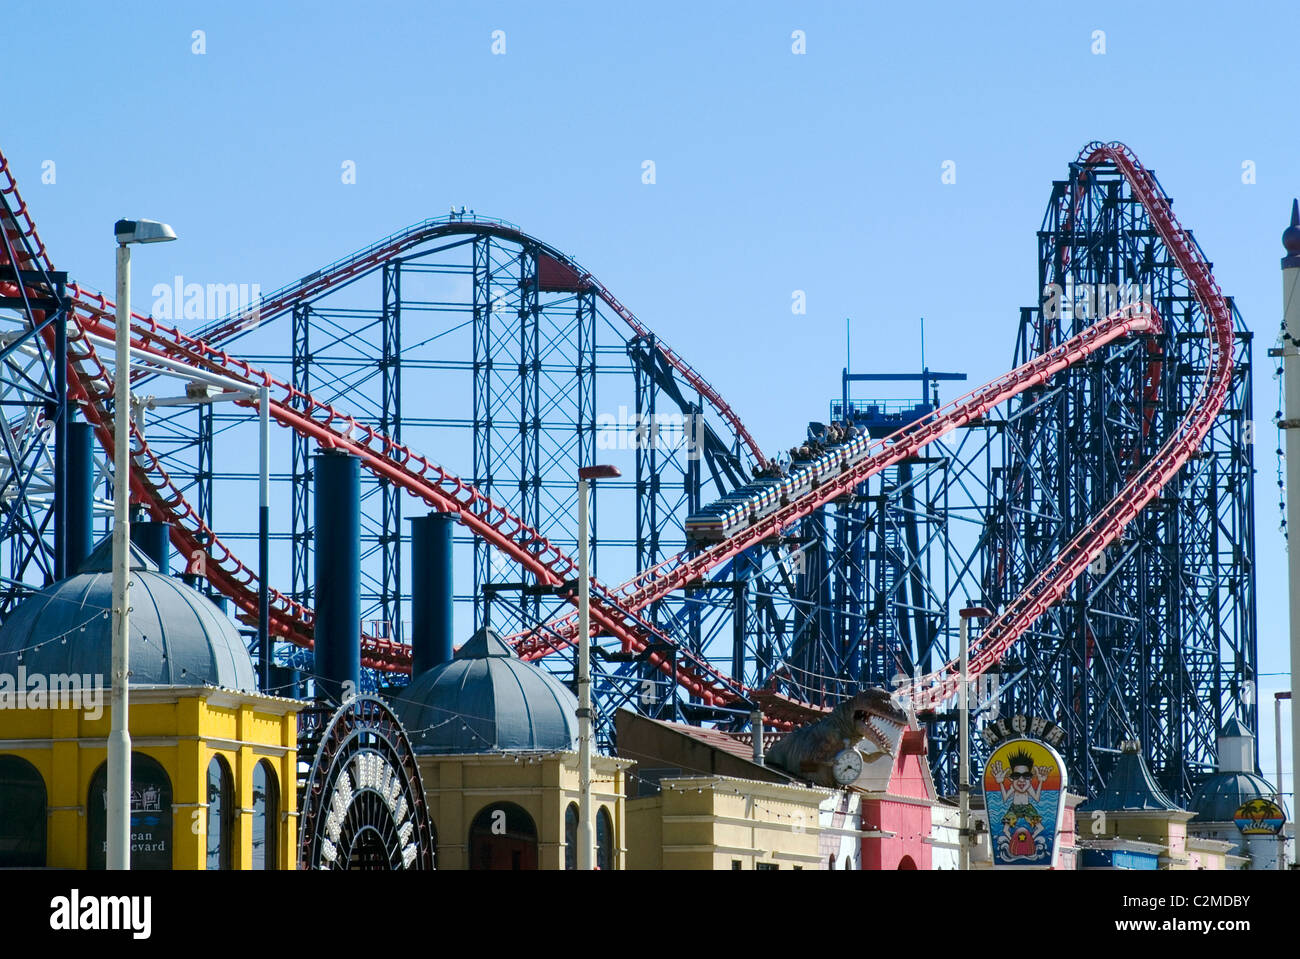 The Big One, the 235ft roller coaster (Europe's largest) at Pleasure Beach, Blackpool, England. Stock Photo